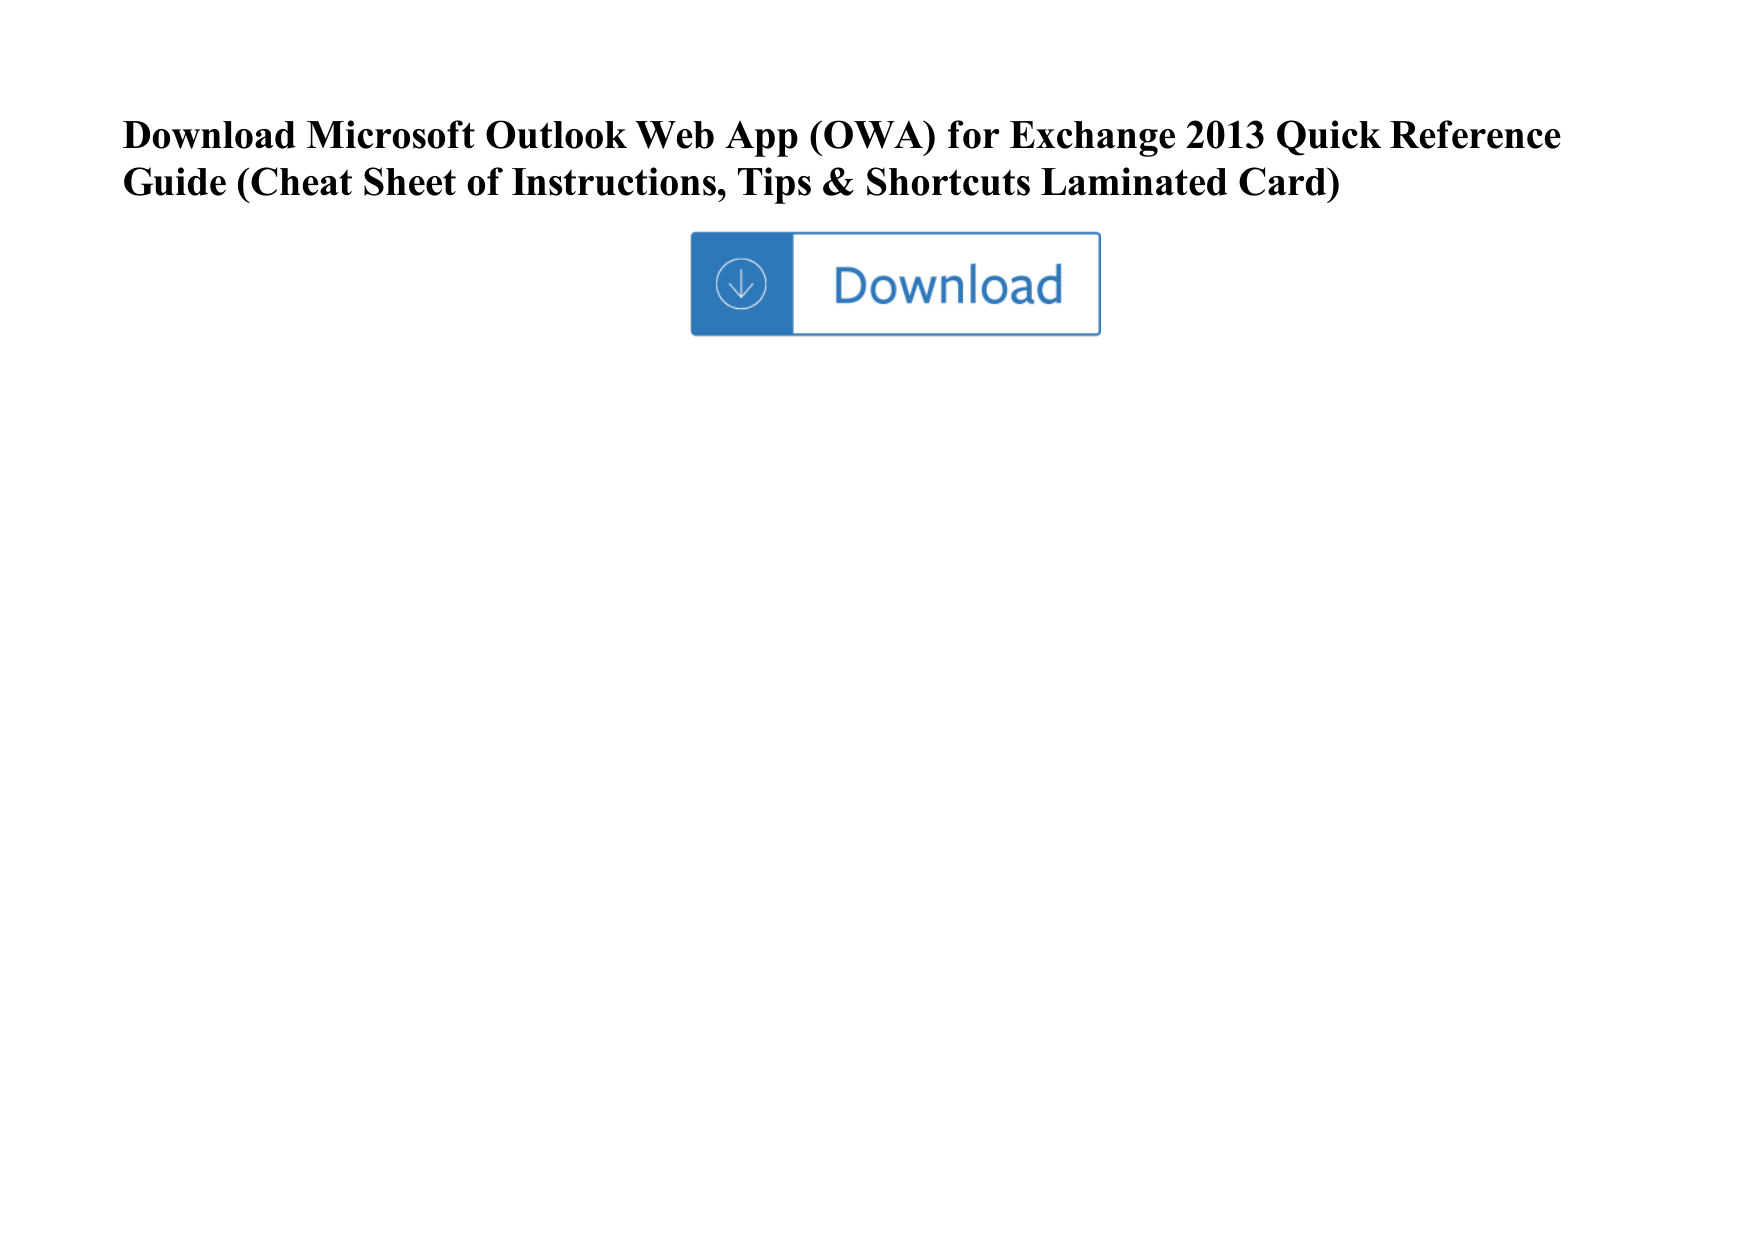 Page 1 of 1 - Microsoft Outlook Web App (OWA) For Exchange 2013 Quick Reference Guide (Cheat Sheet Of Instructions, Tips & Shortcuts  Lam Microsoft-outlook-web-app-owa-for-exchange-2013-quick-reference-guide-cheat-sheet-of-instructions-tips-shortcuts-laminated-card